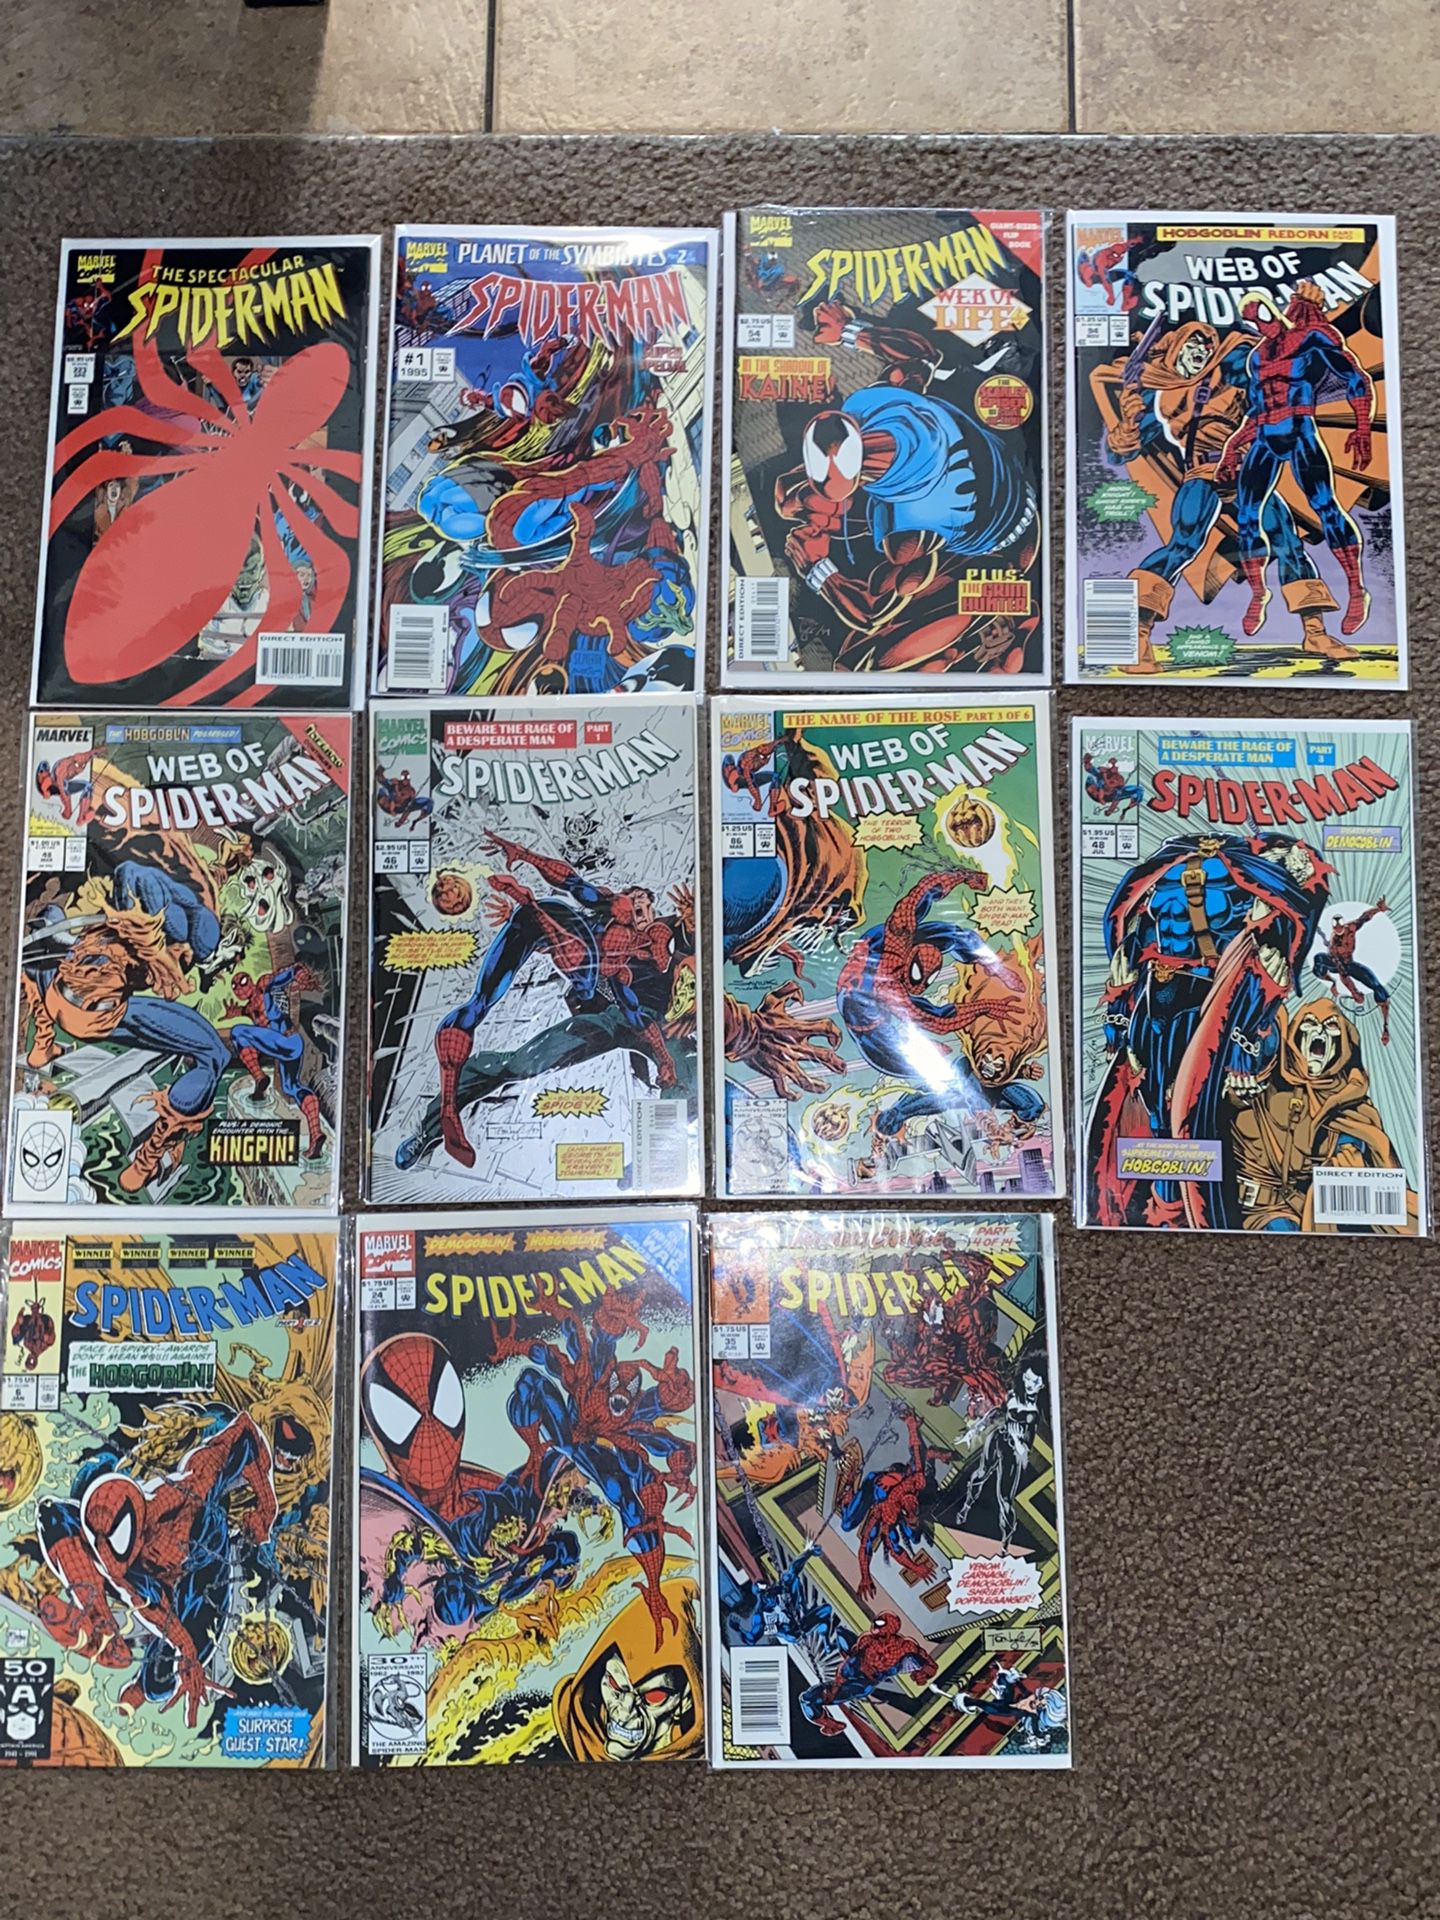 Comic Books $70 For All 11 Or Look At Description 